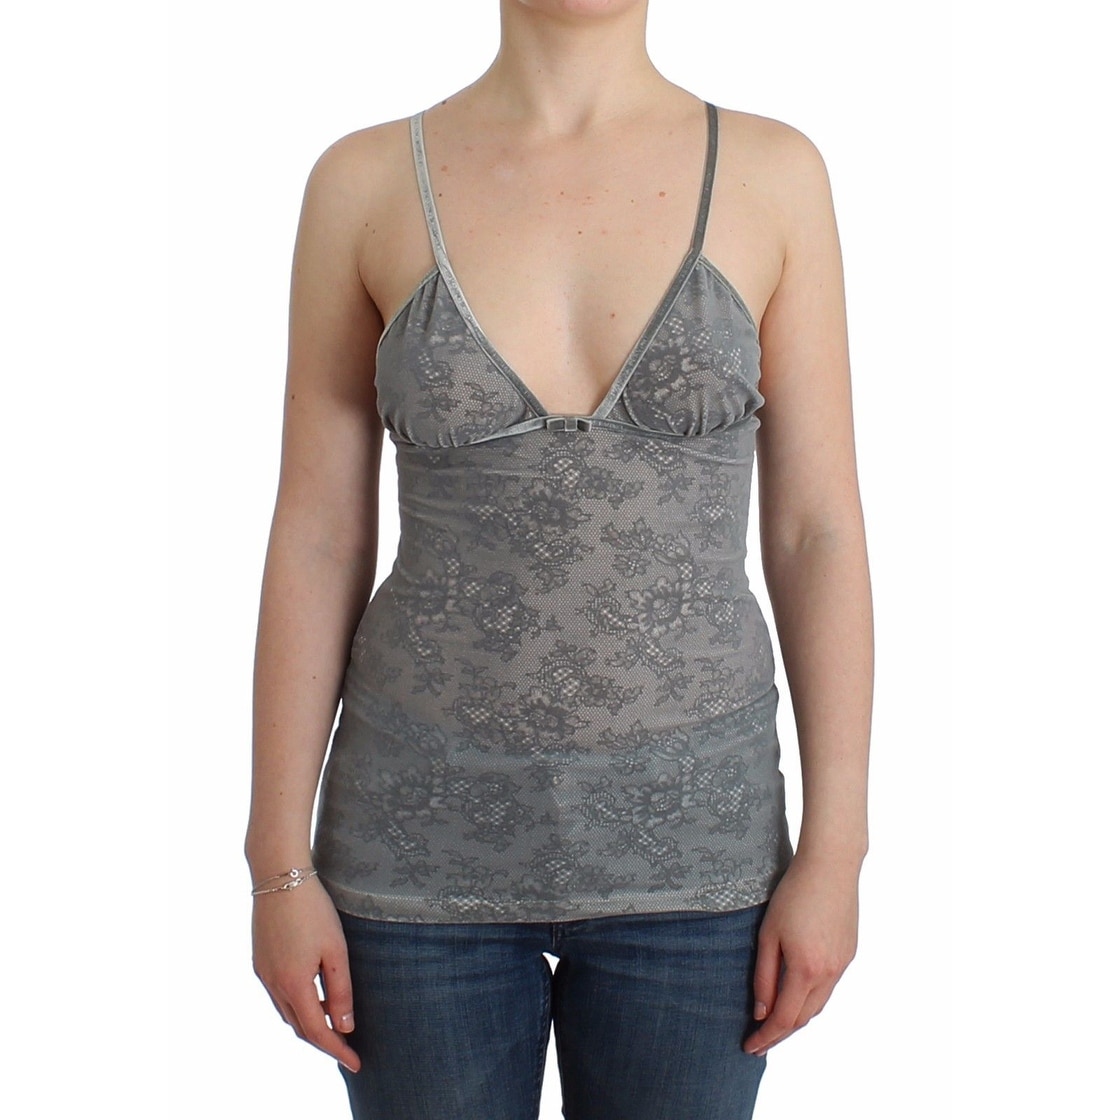 m and s camisole